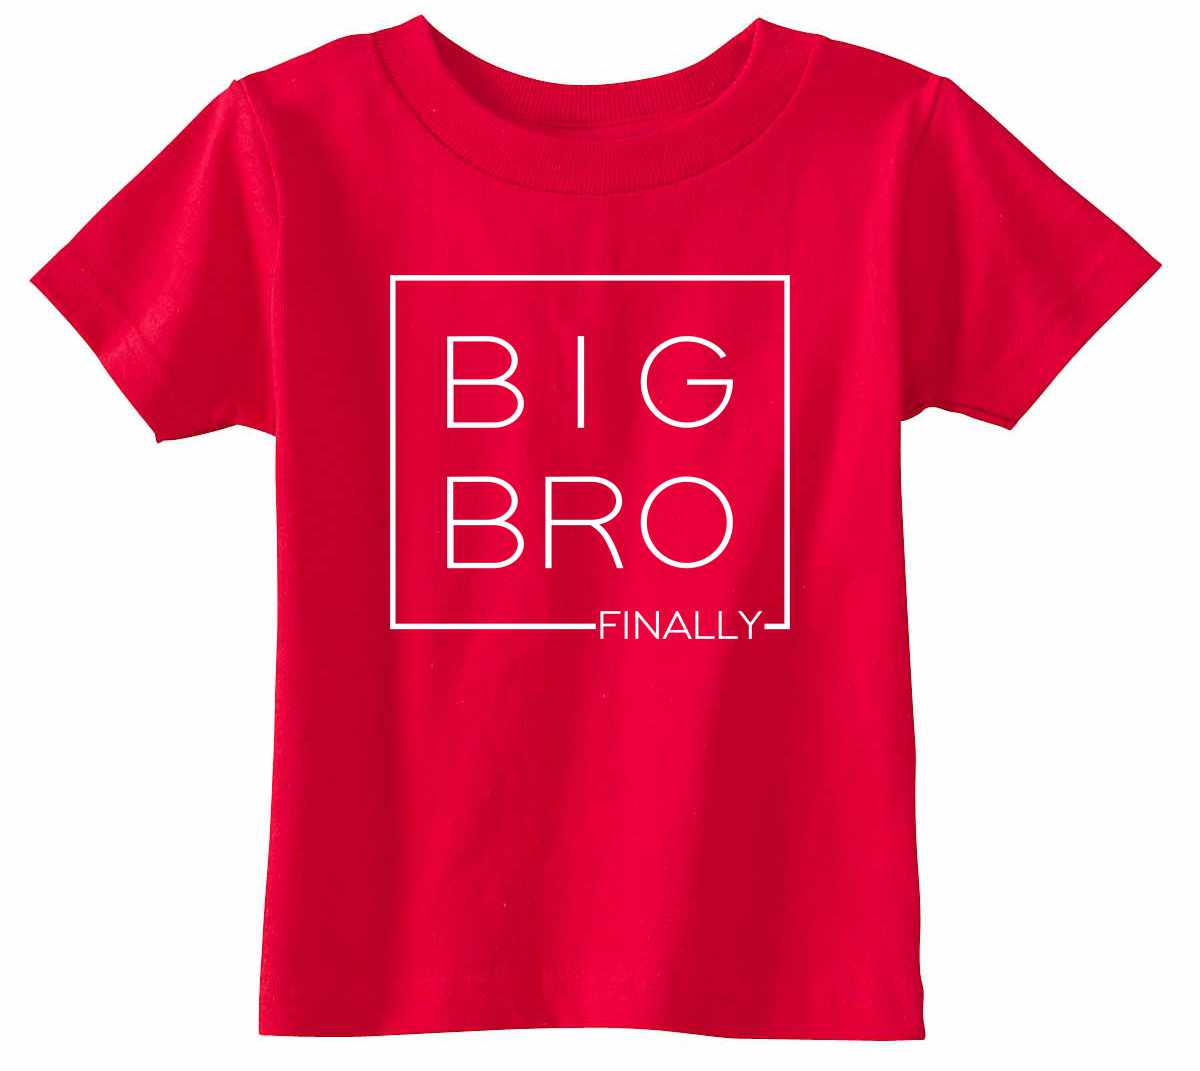 Big Bro Finally- Big Brother Boxed on Infant-Toddler T-Shirt (#1314-7)